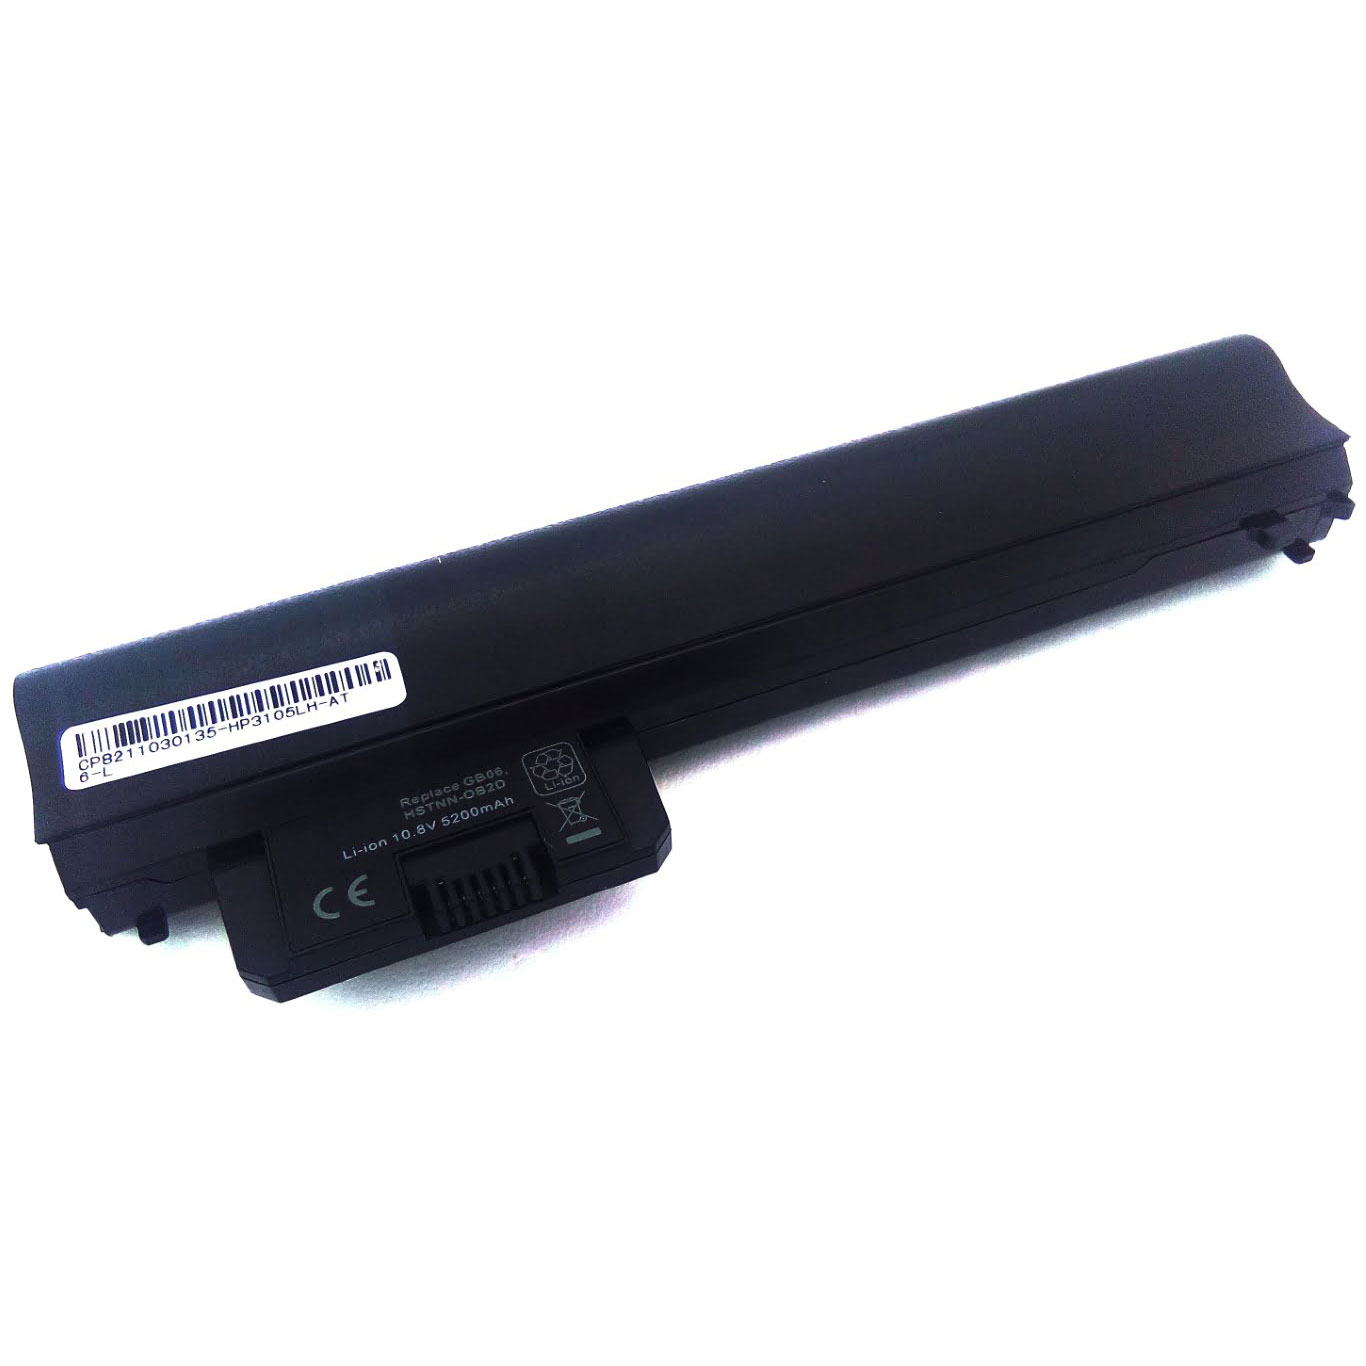 626869-321, 628419-001 replacement Laptop Battery for HP 3105m, 3115m, 10.8V, 6 cells, 4400mAh